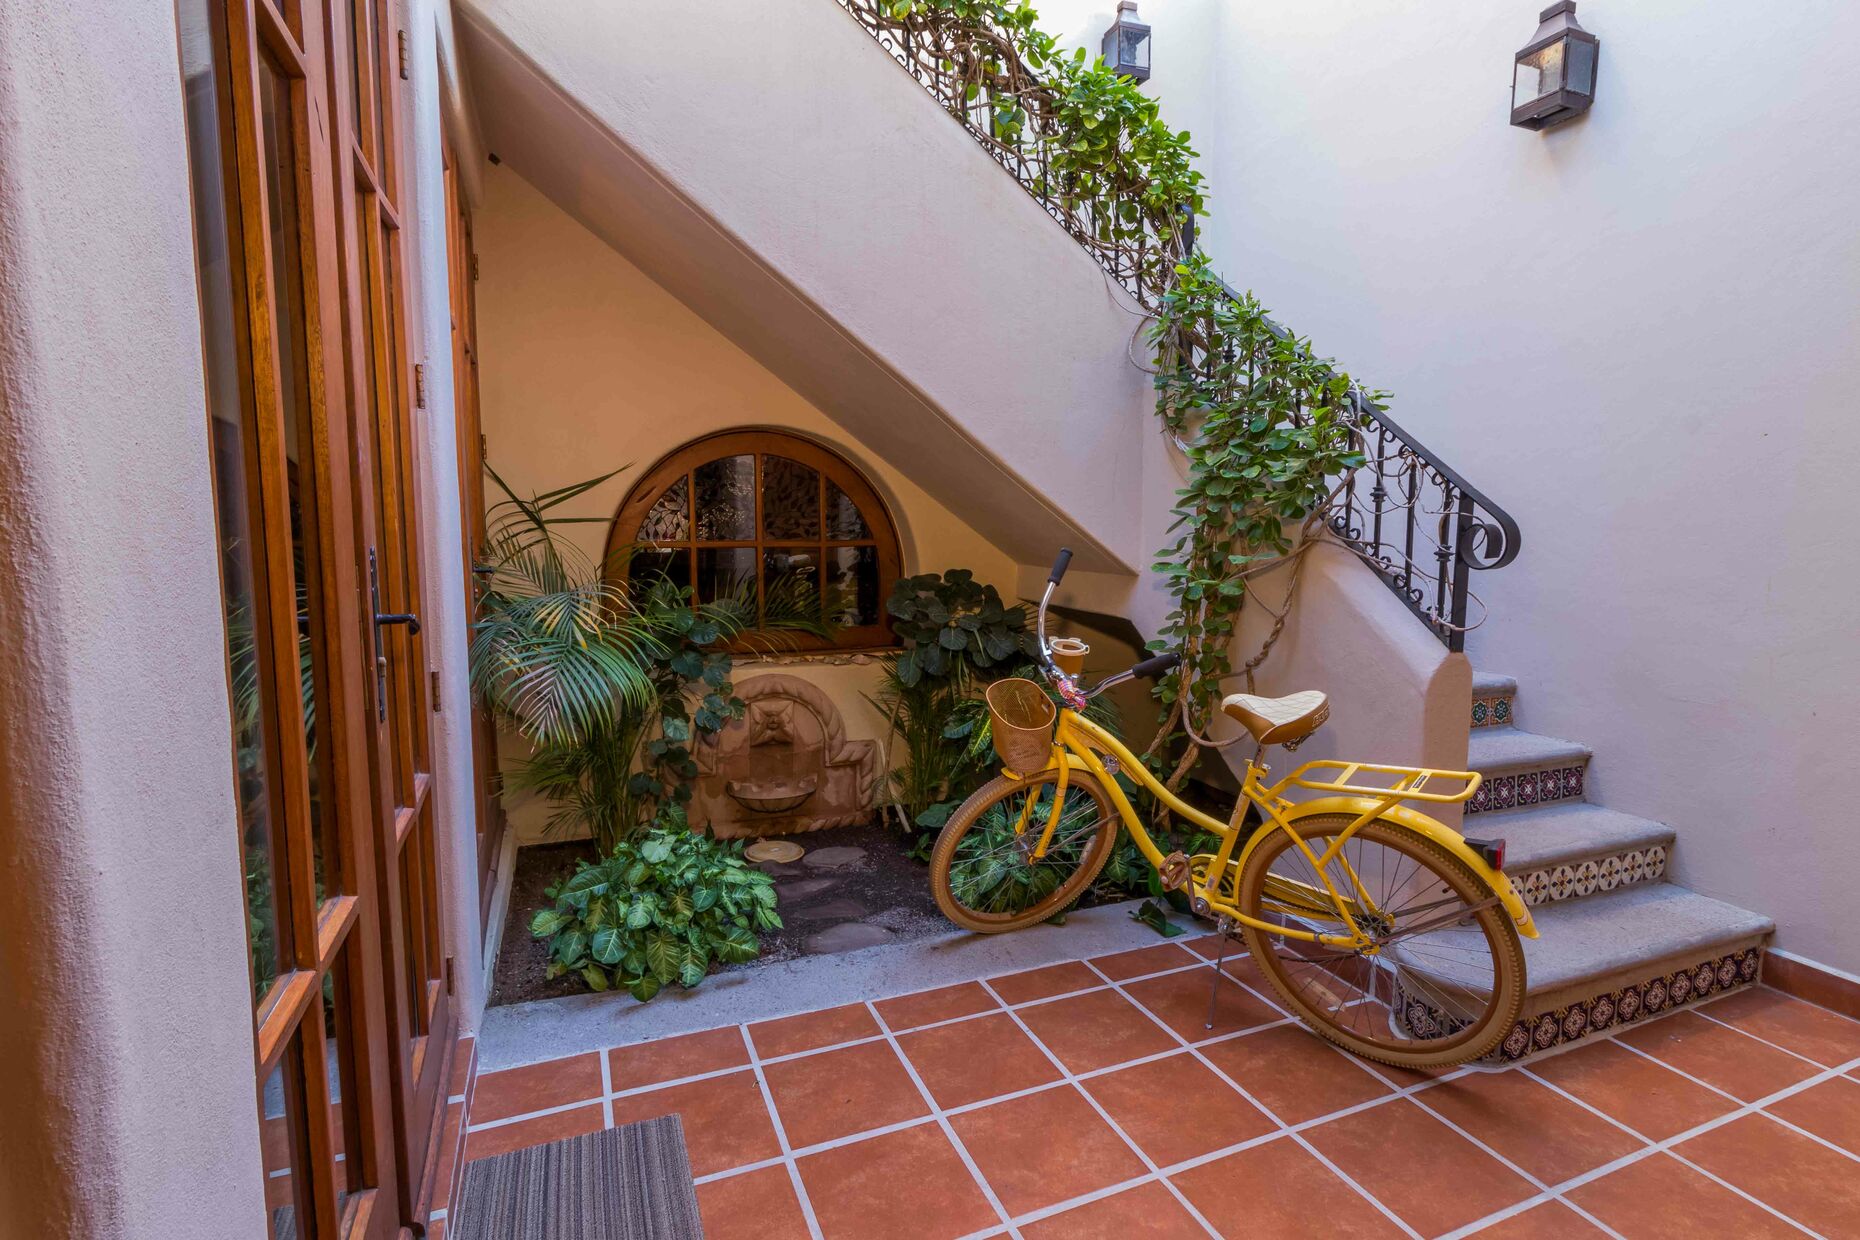 Garden area / Fountain / Stairwell to Terrace / Bike available for guest